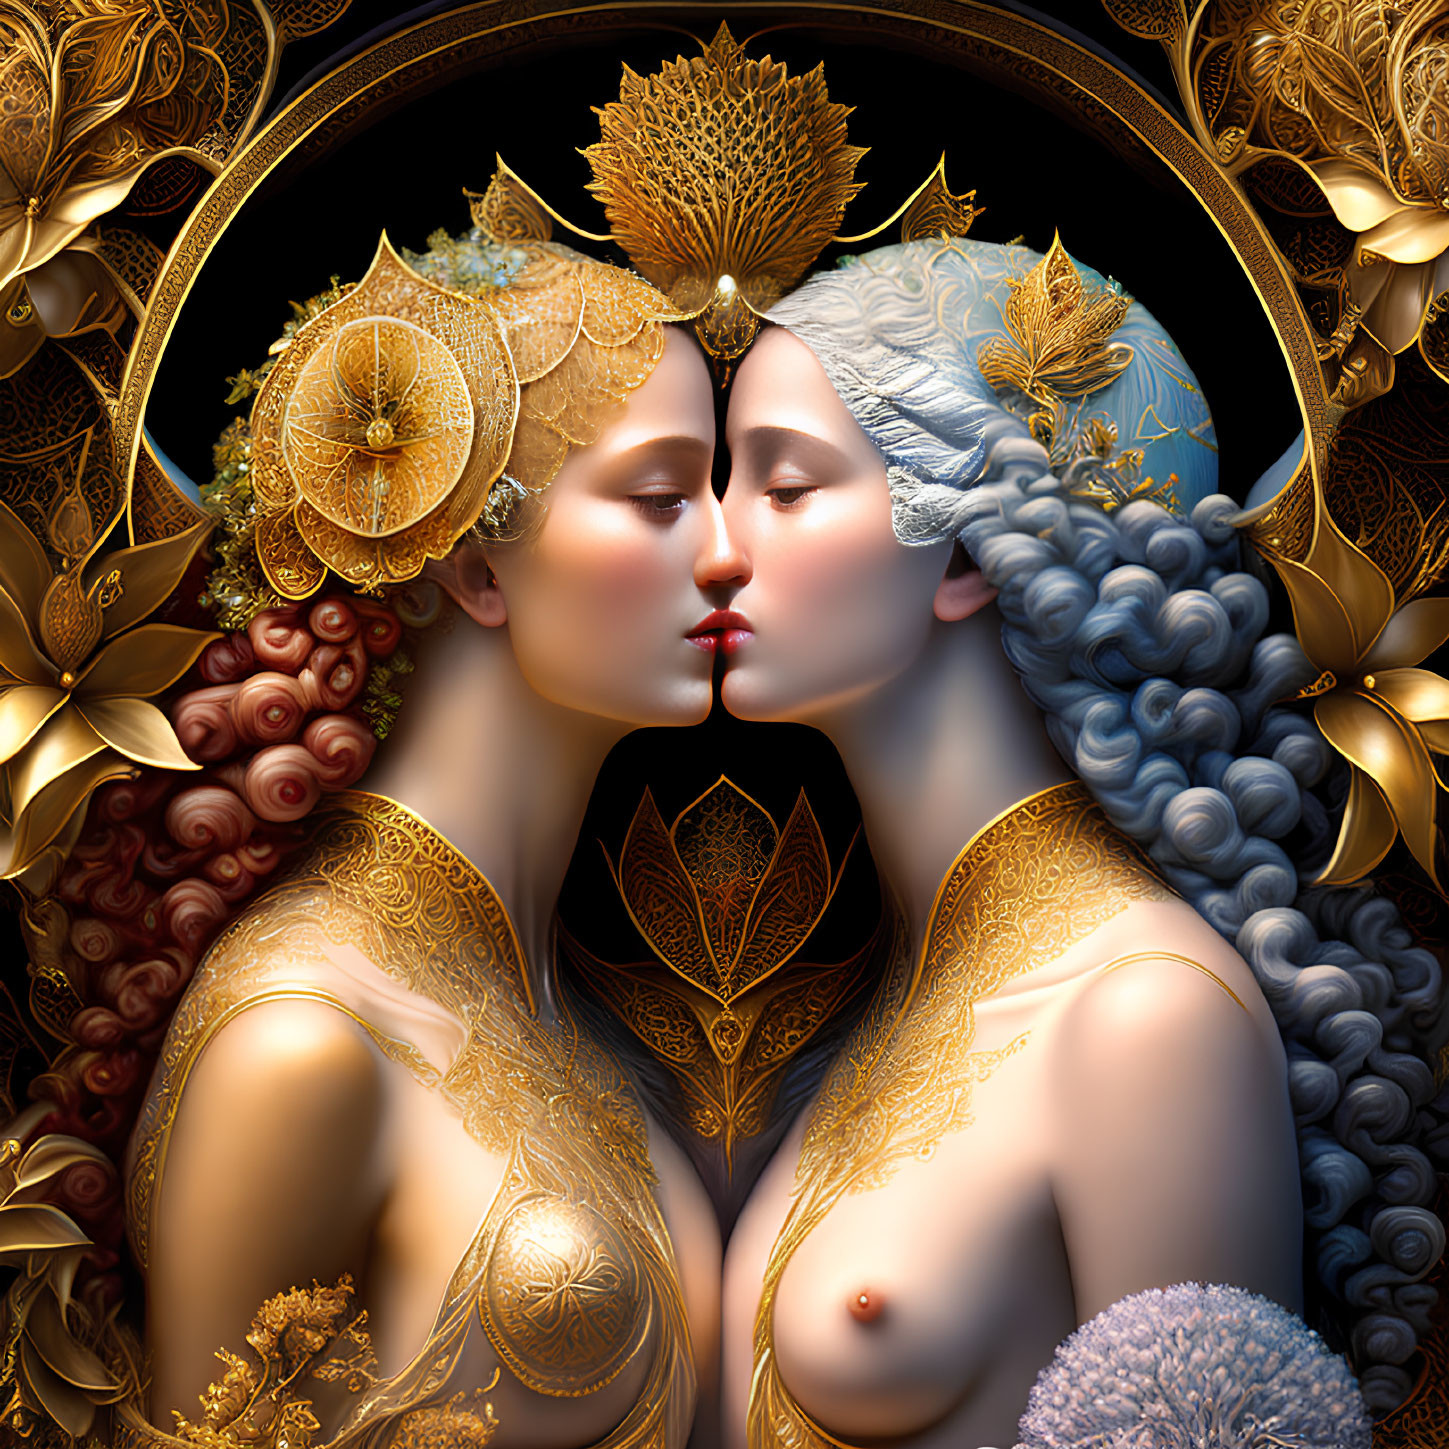 Symmetrical pose of two ornately adorned women with golden floral patterns